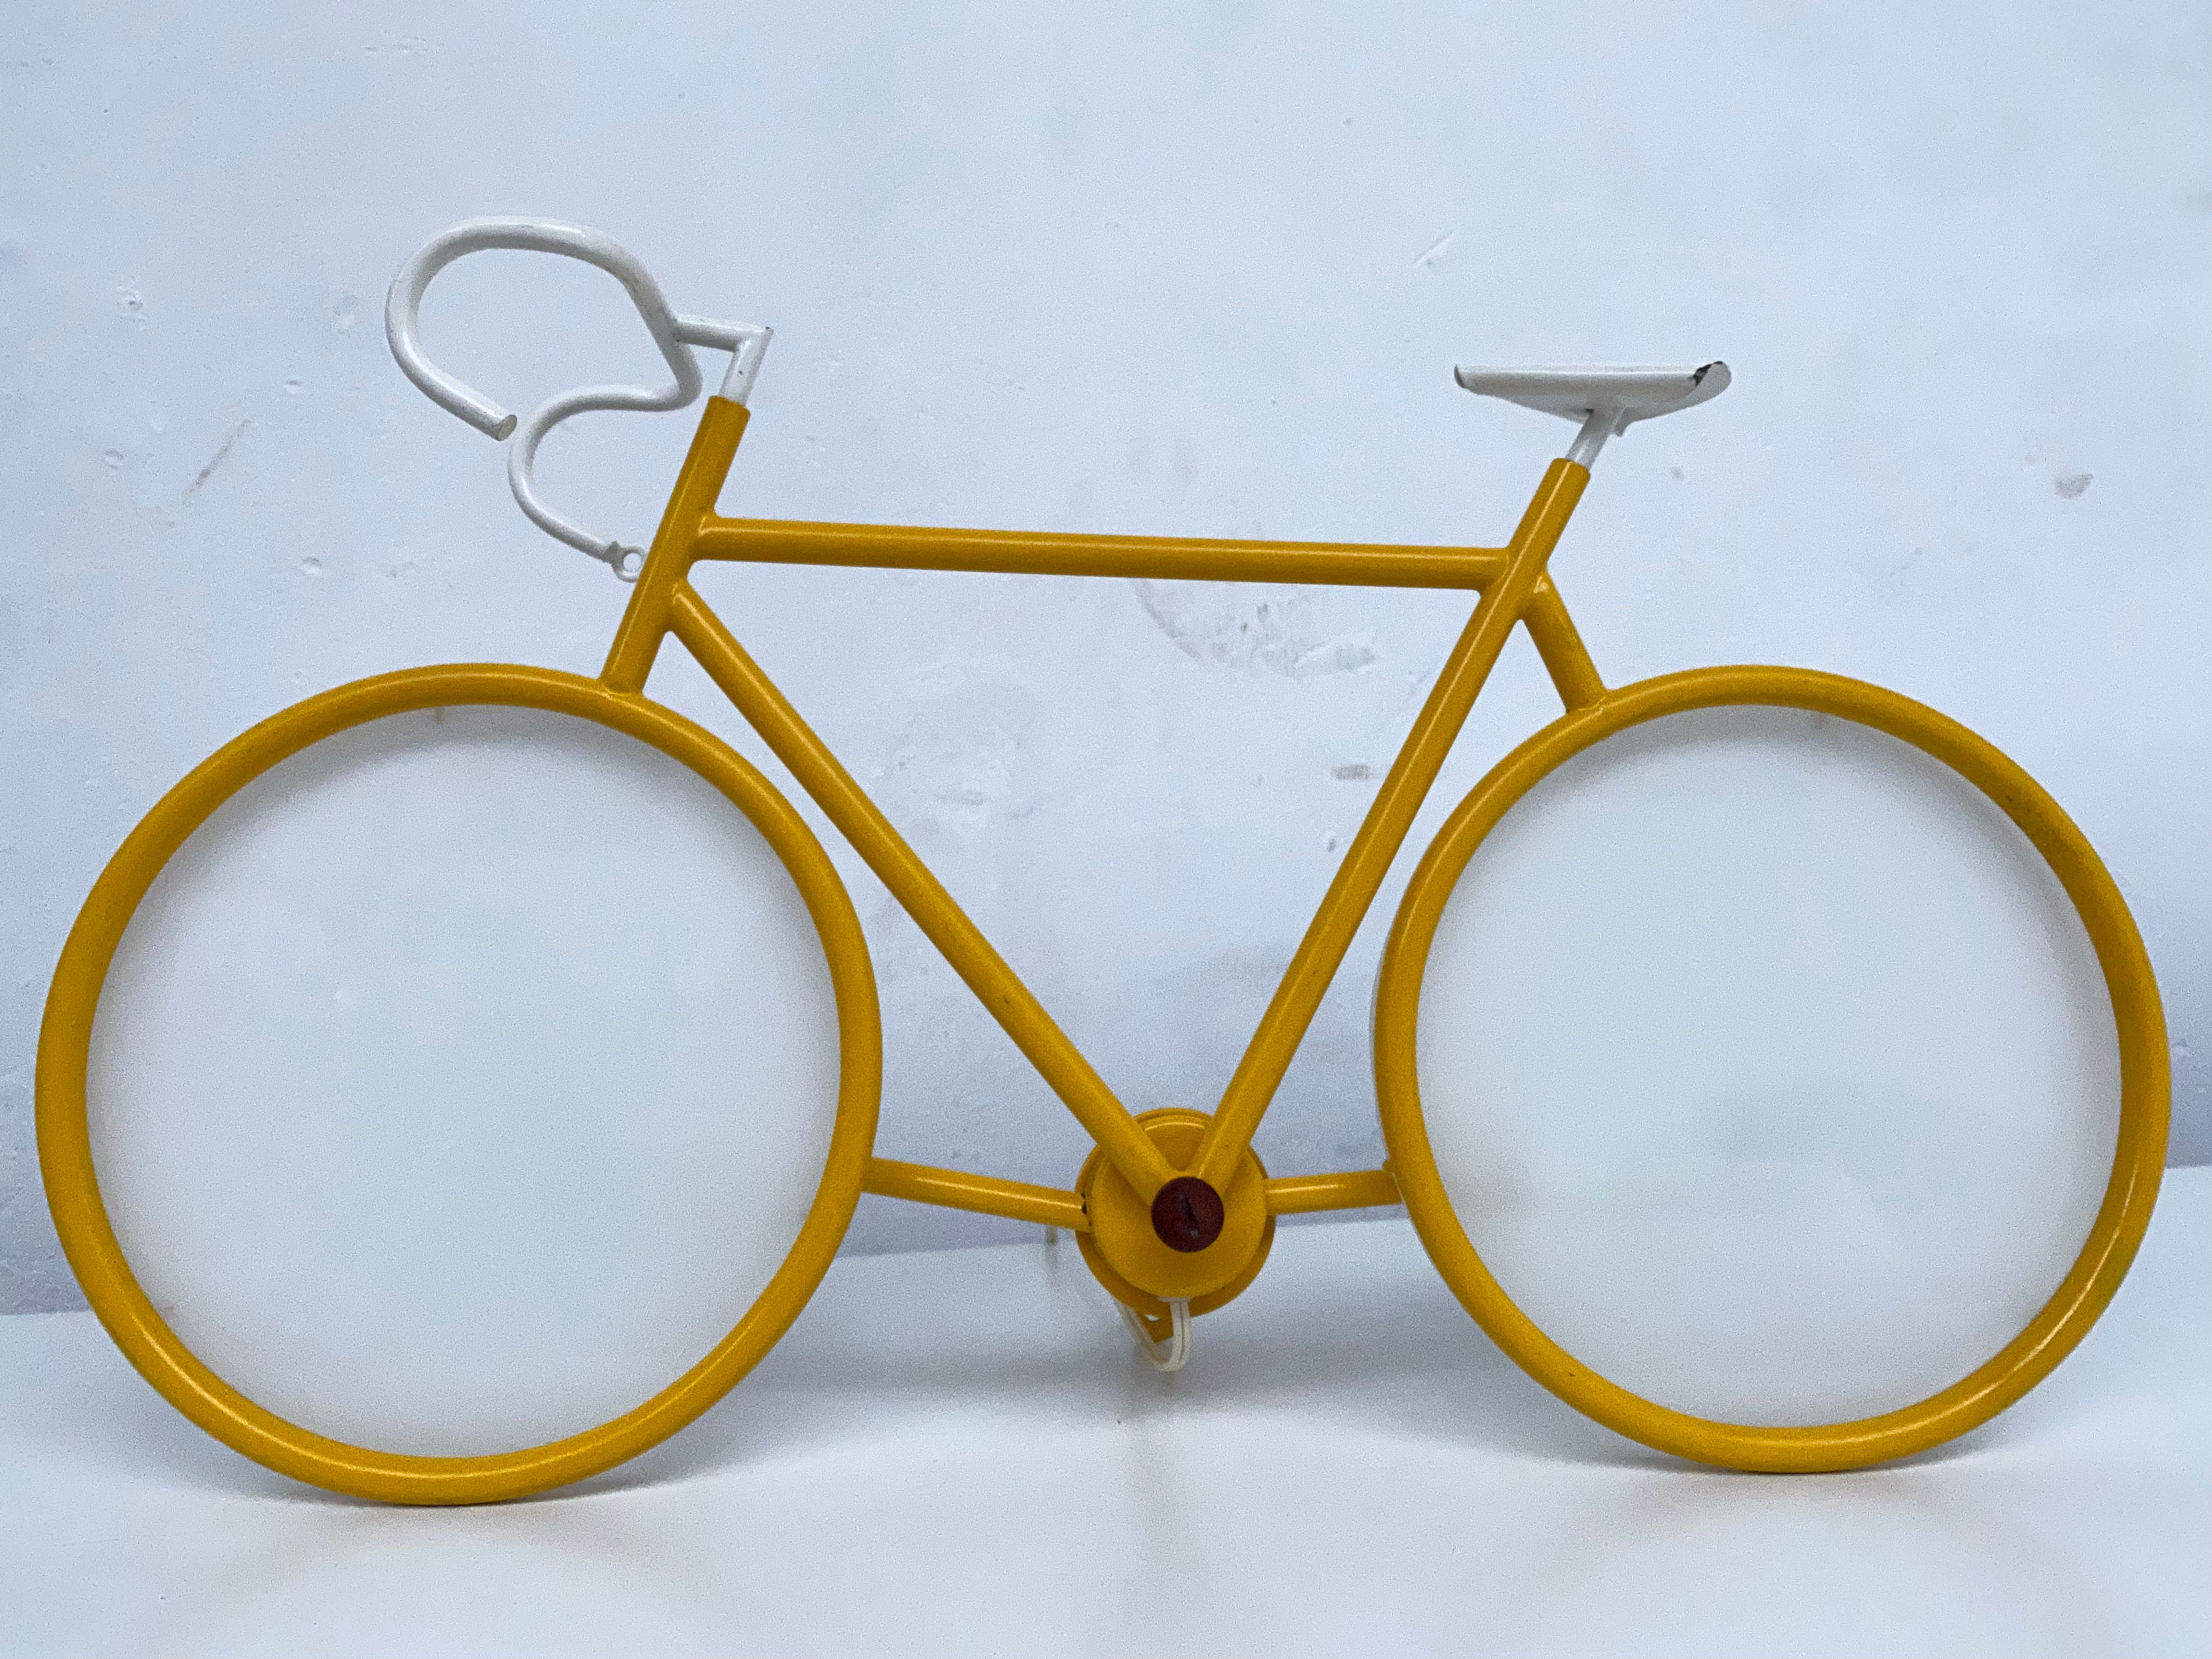 A fun statement on your wall or desk in the form of this 1970's Pop art racing bicycle by Italian lighting company Zicoli

Yellow steel frame and opal glass 'wheel' diffusers

This lamp can be wall mounted or be used as a table lamp and is